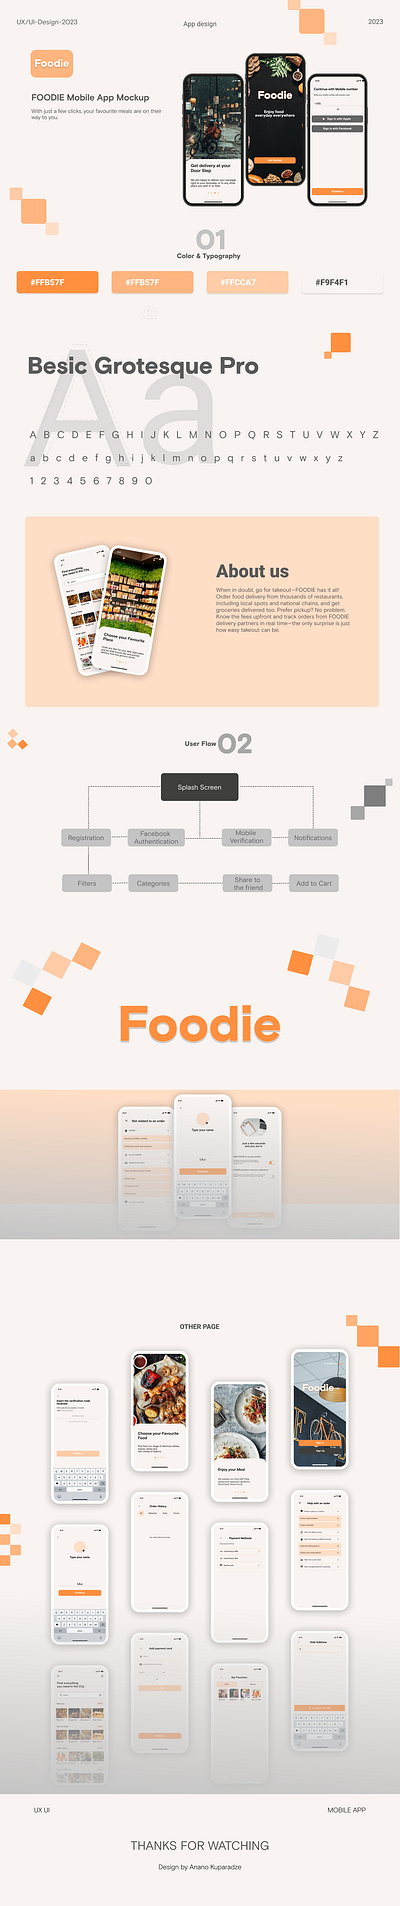 FOODIE - Mobile App for Food Delivery (Exam Project) animation design exam project figma food delivery ui uiux design ux